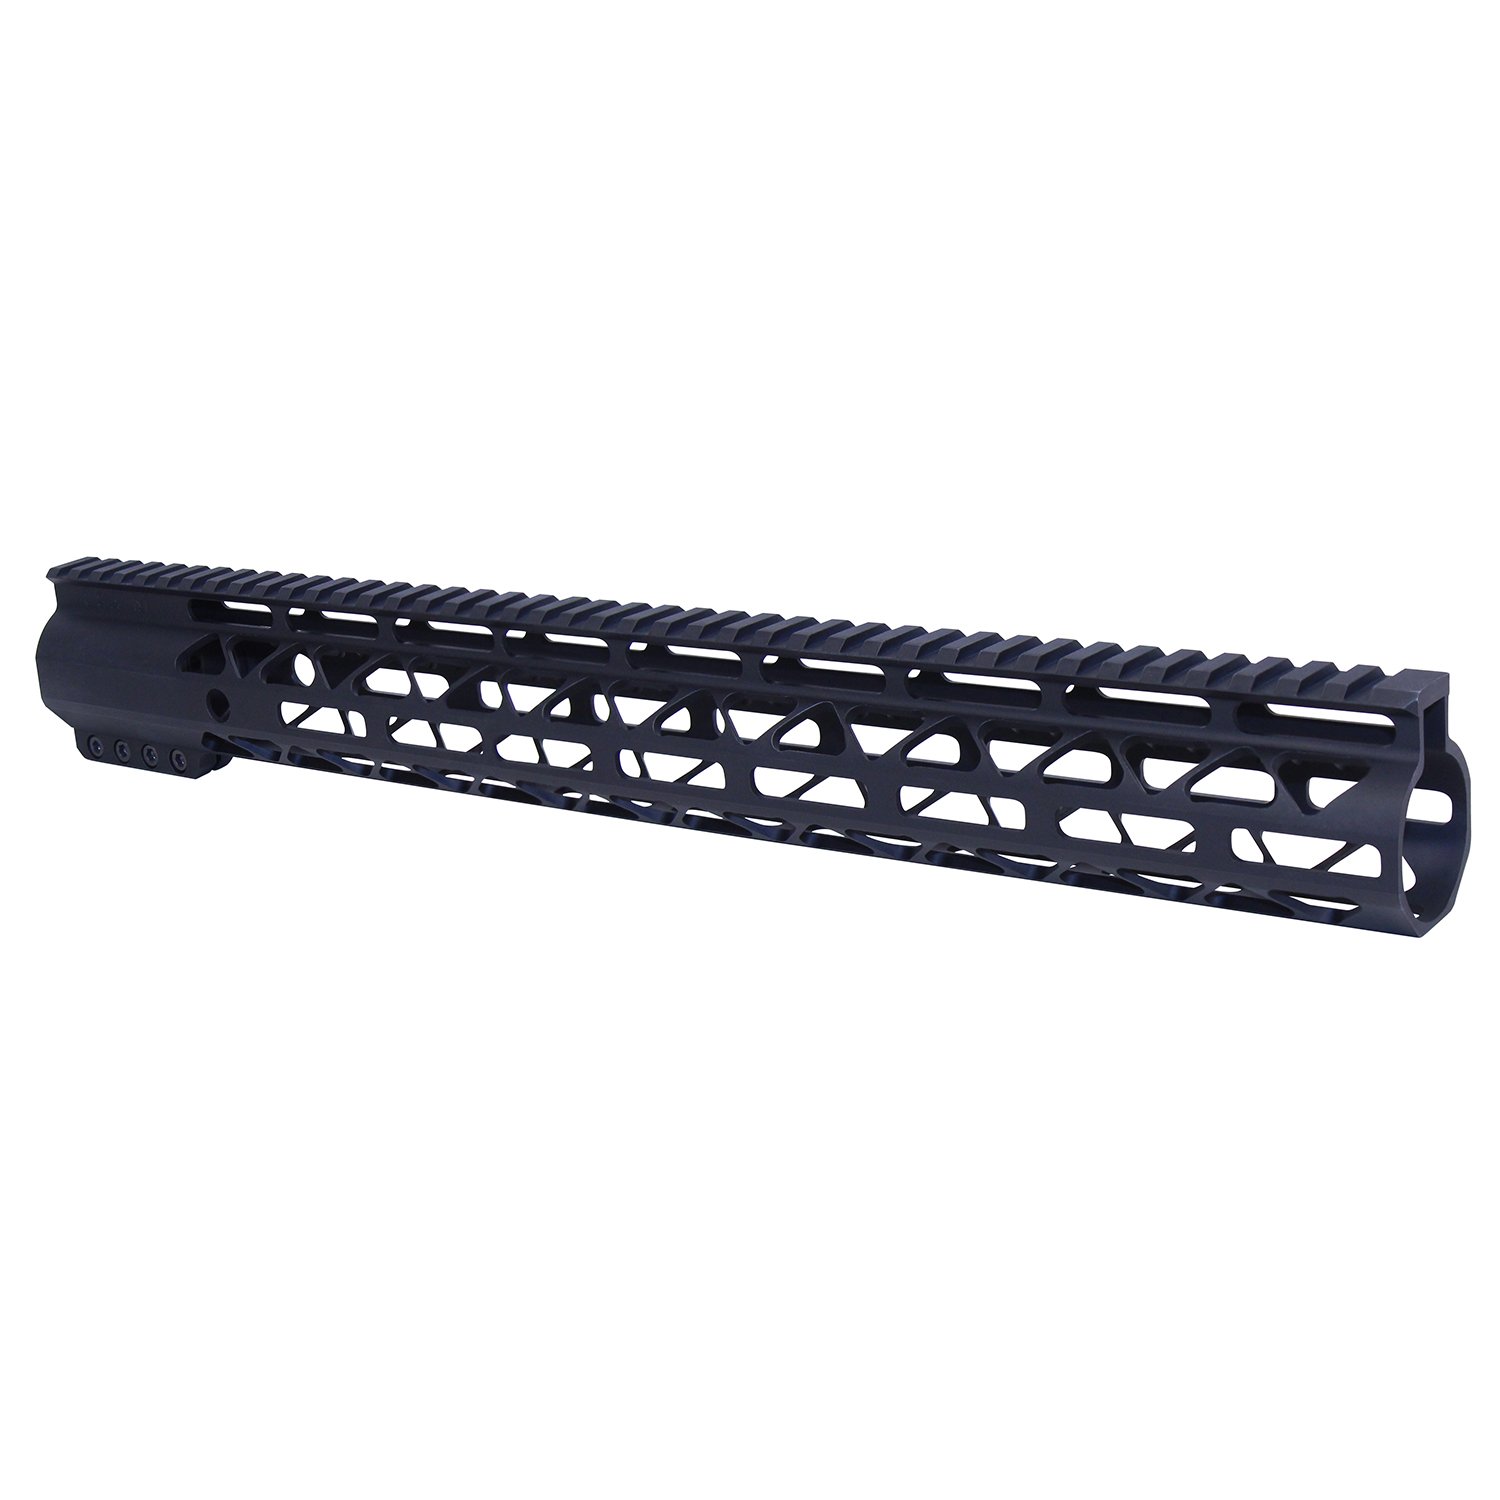 16.5" AIR-LOK Series M-LOK Compression Free Floating Handguard With Monolithic Top Rail (Anodized Black)